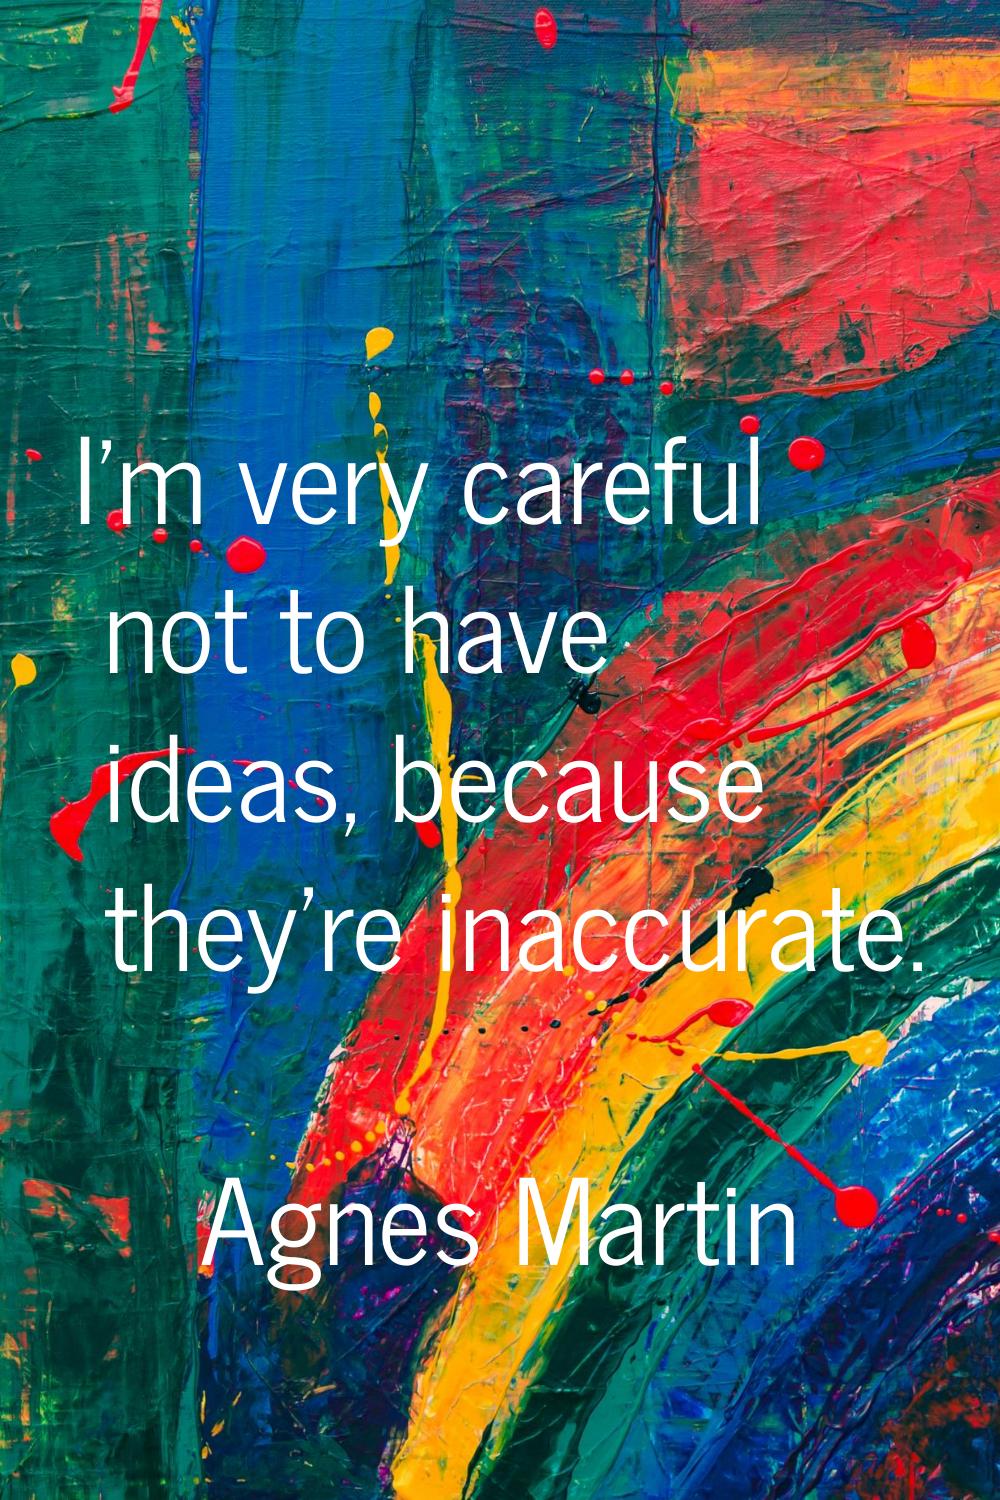 I'm very careful not to have ideas, because they're inaccurate.